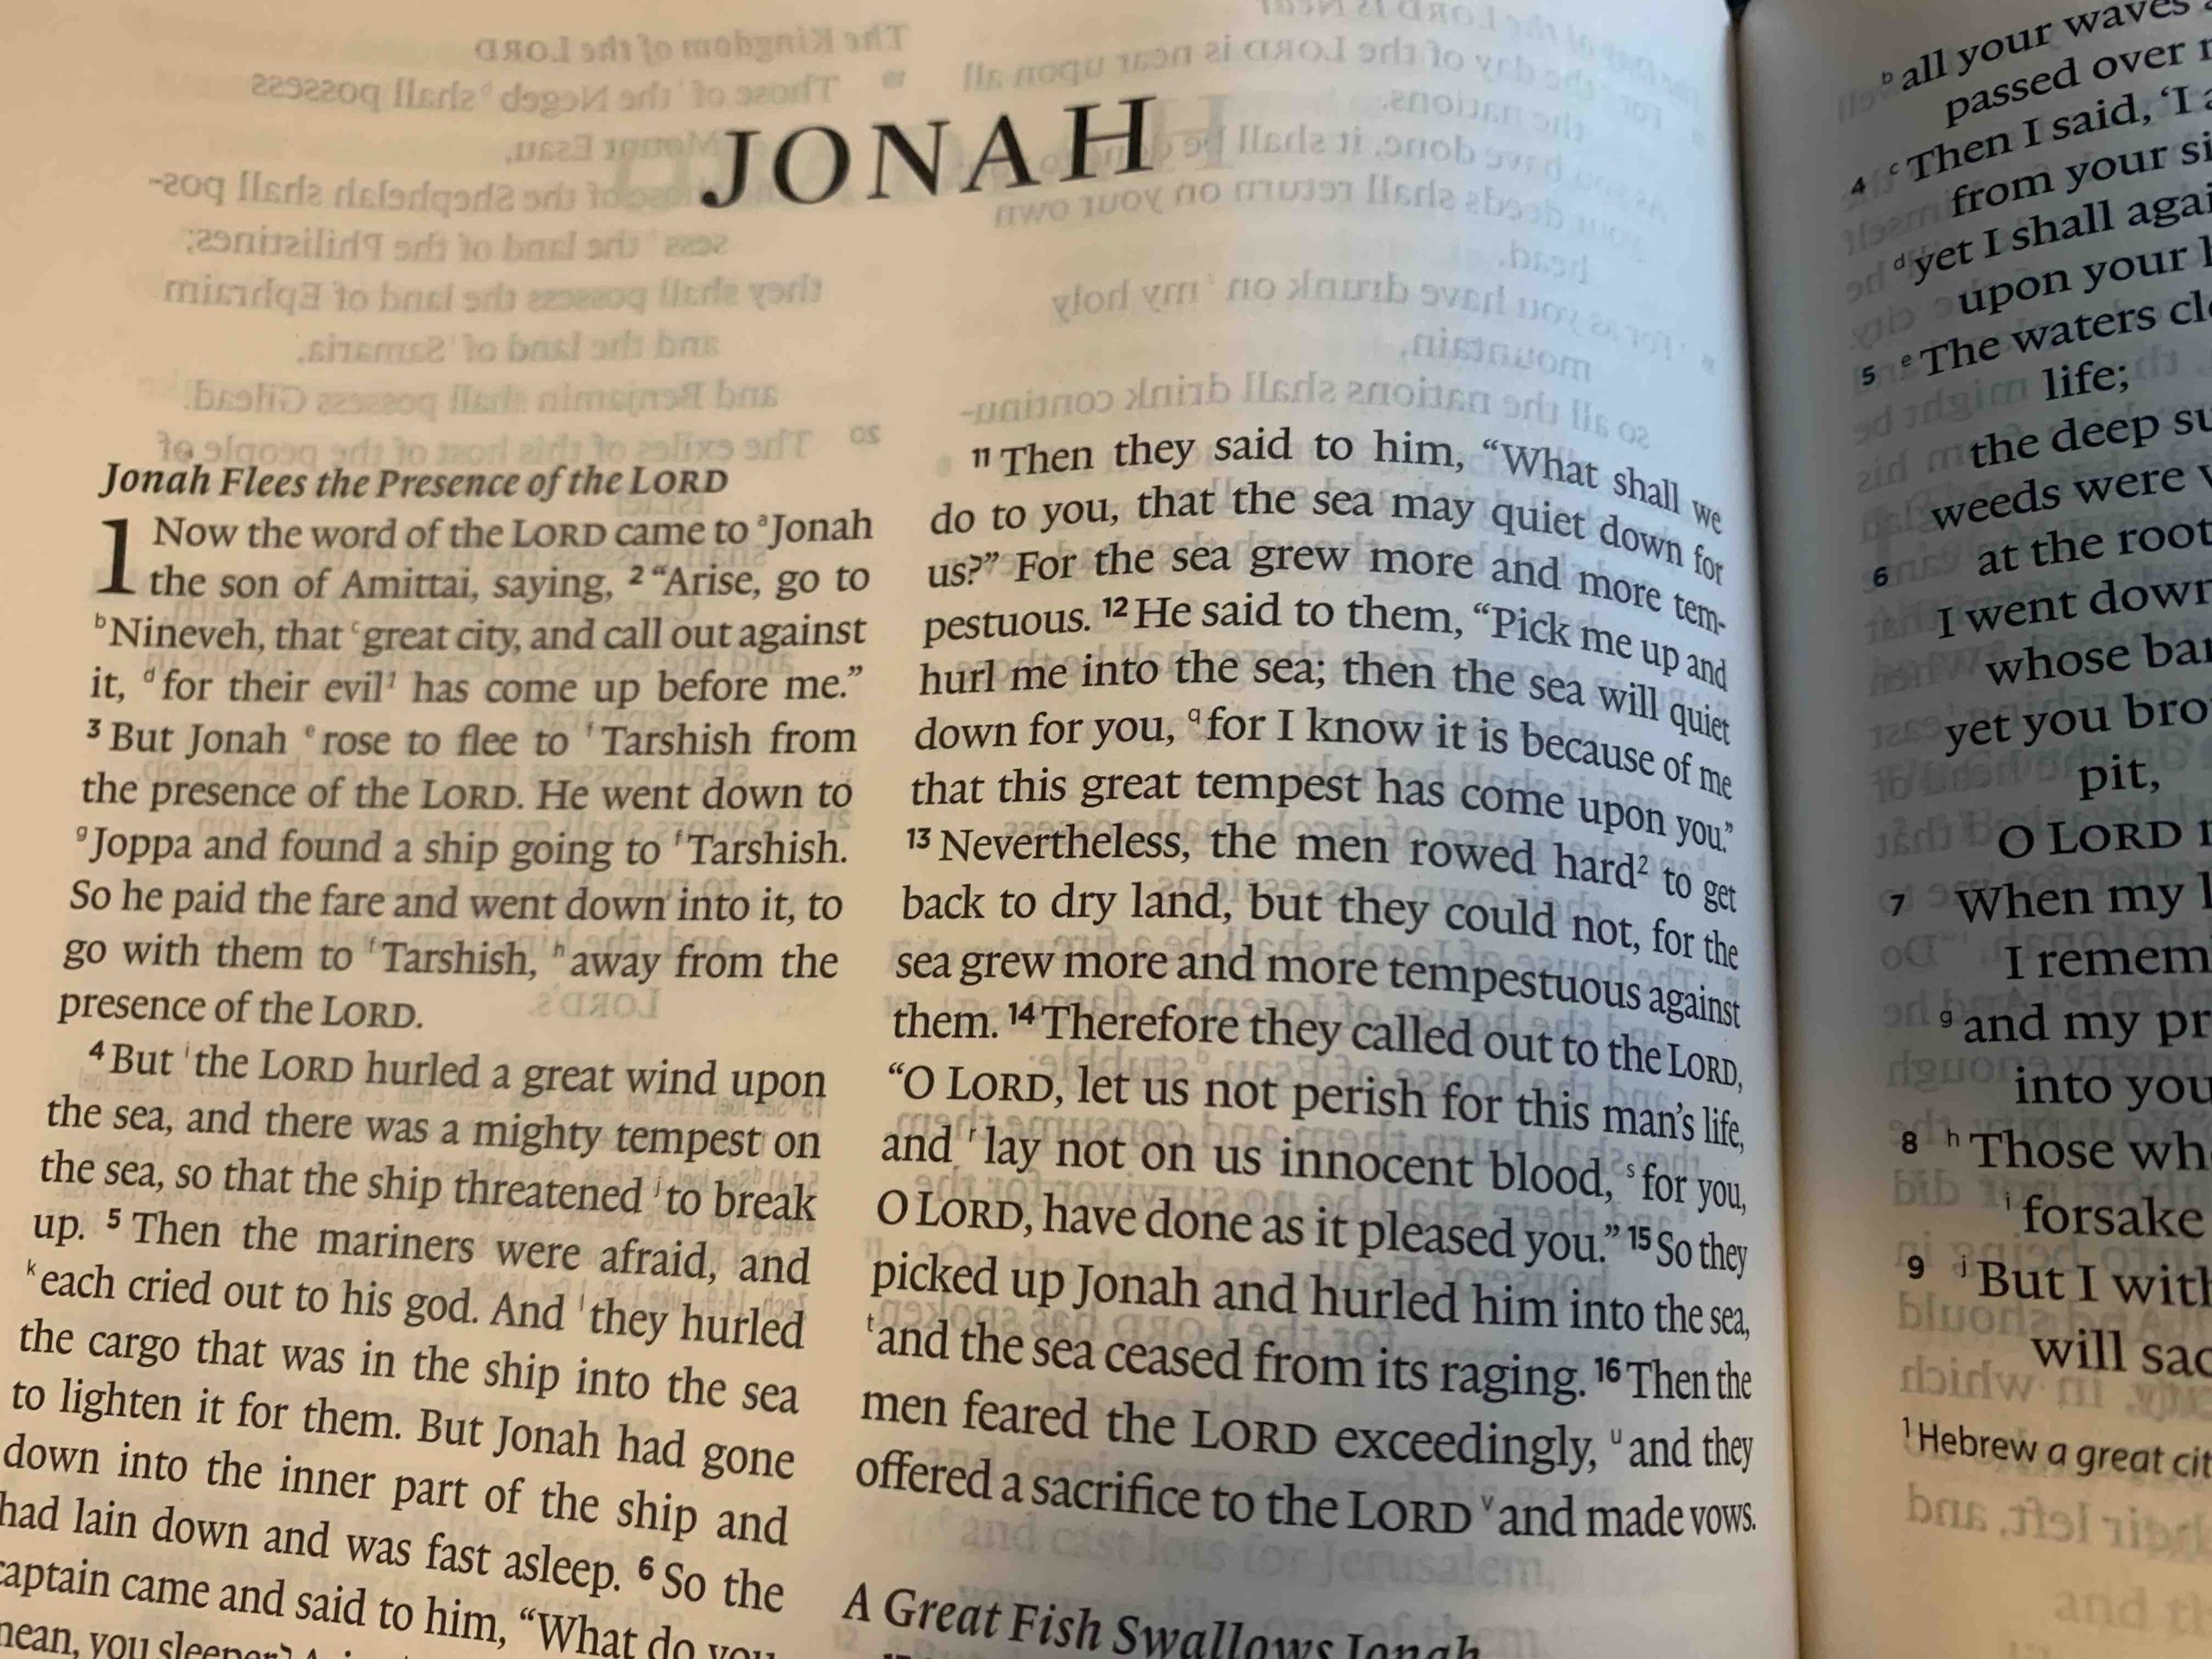 Jonah 3:1-5a  “The People Believed God”